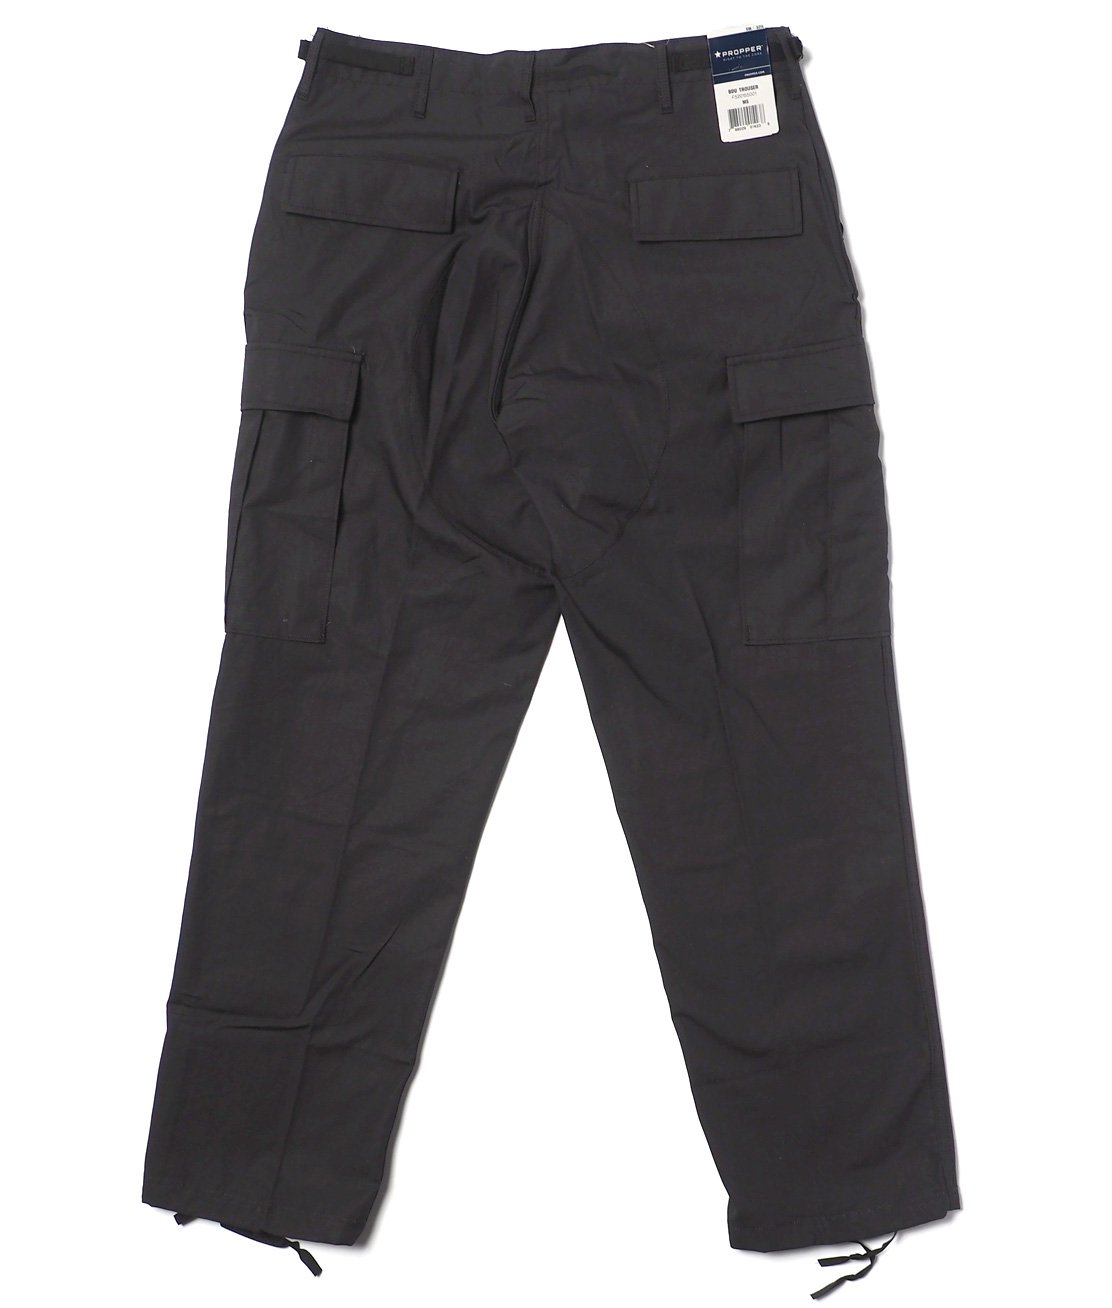 【PROPPER】BDU TROUSER 100% COTTON RIPSTOP - BLACK カーゴパンツ プロッパー - HUNKY DORY